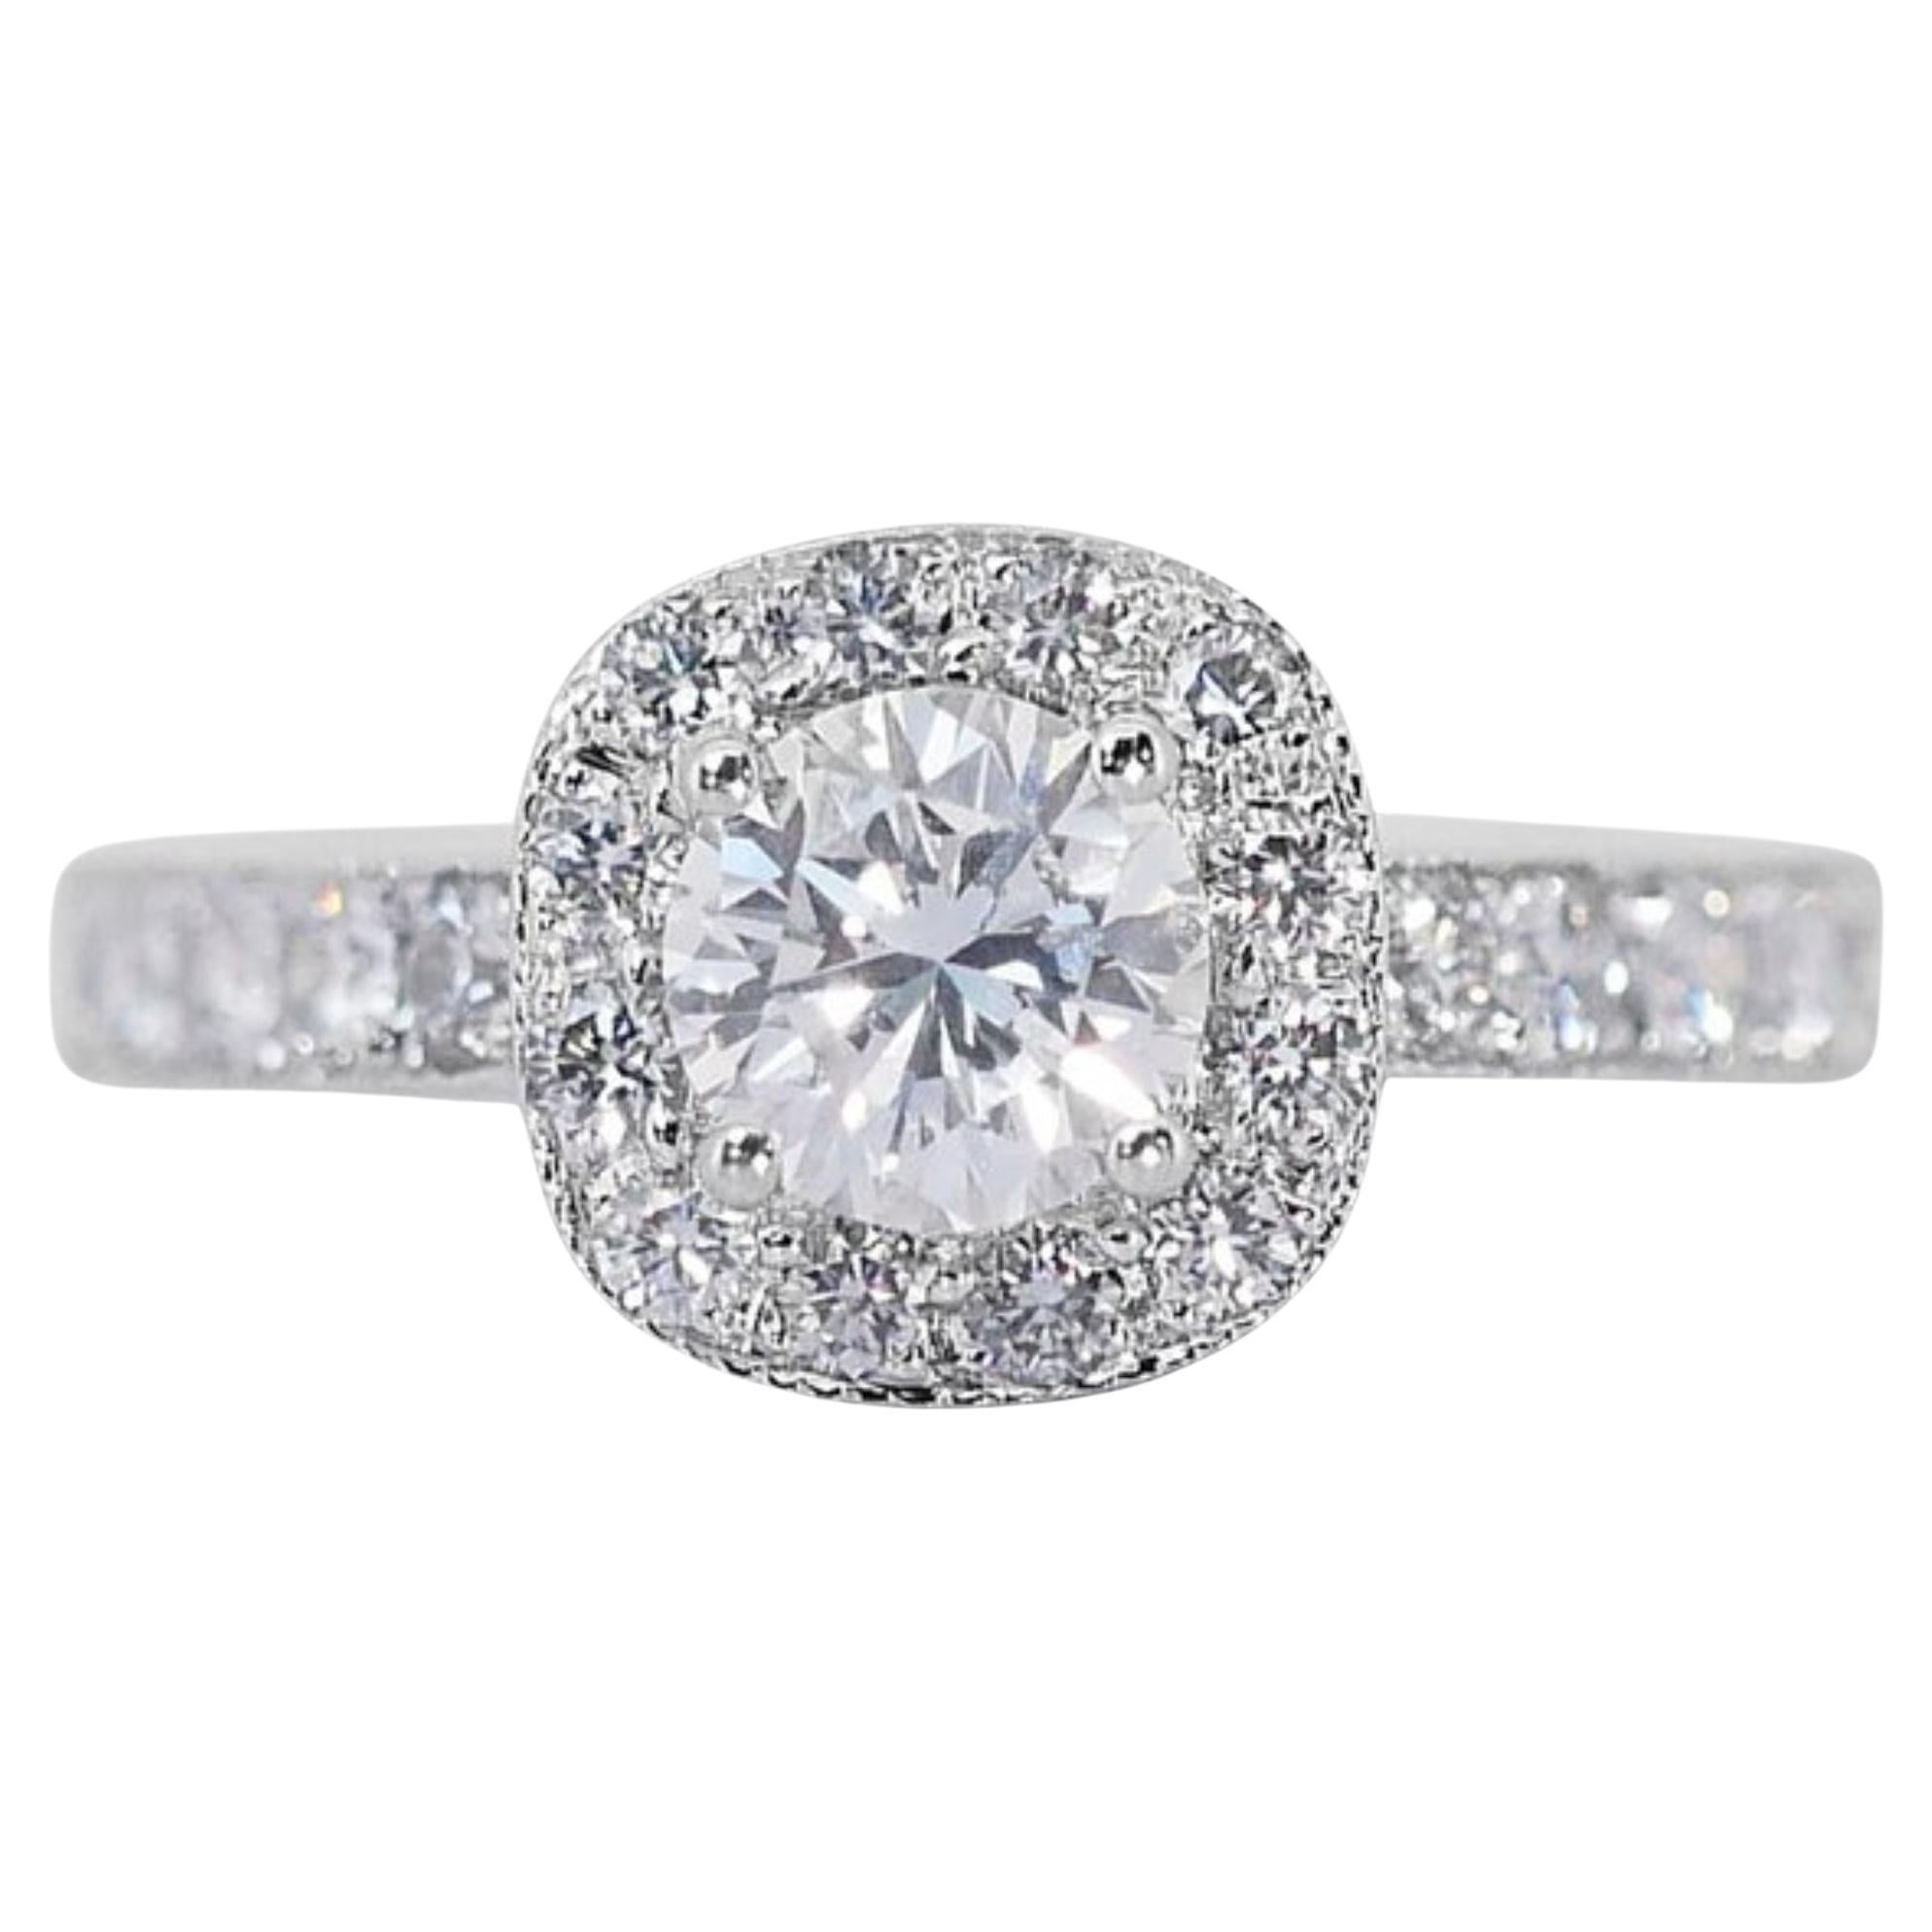 Captivating 0.52ct Pave Diamond Ring set in 18K White Gold For Sale